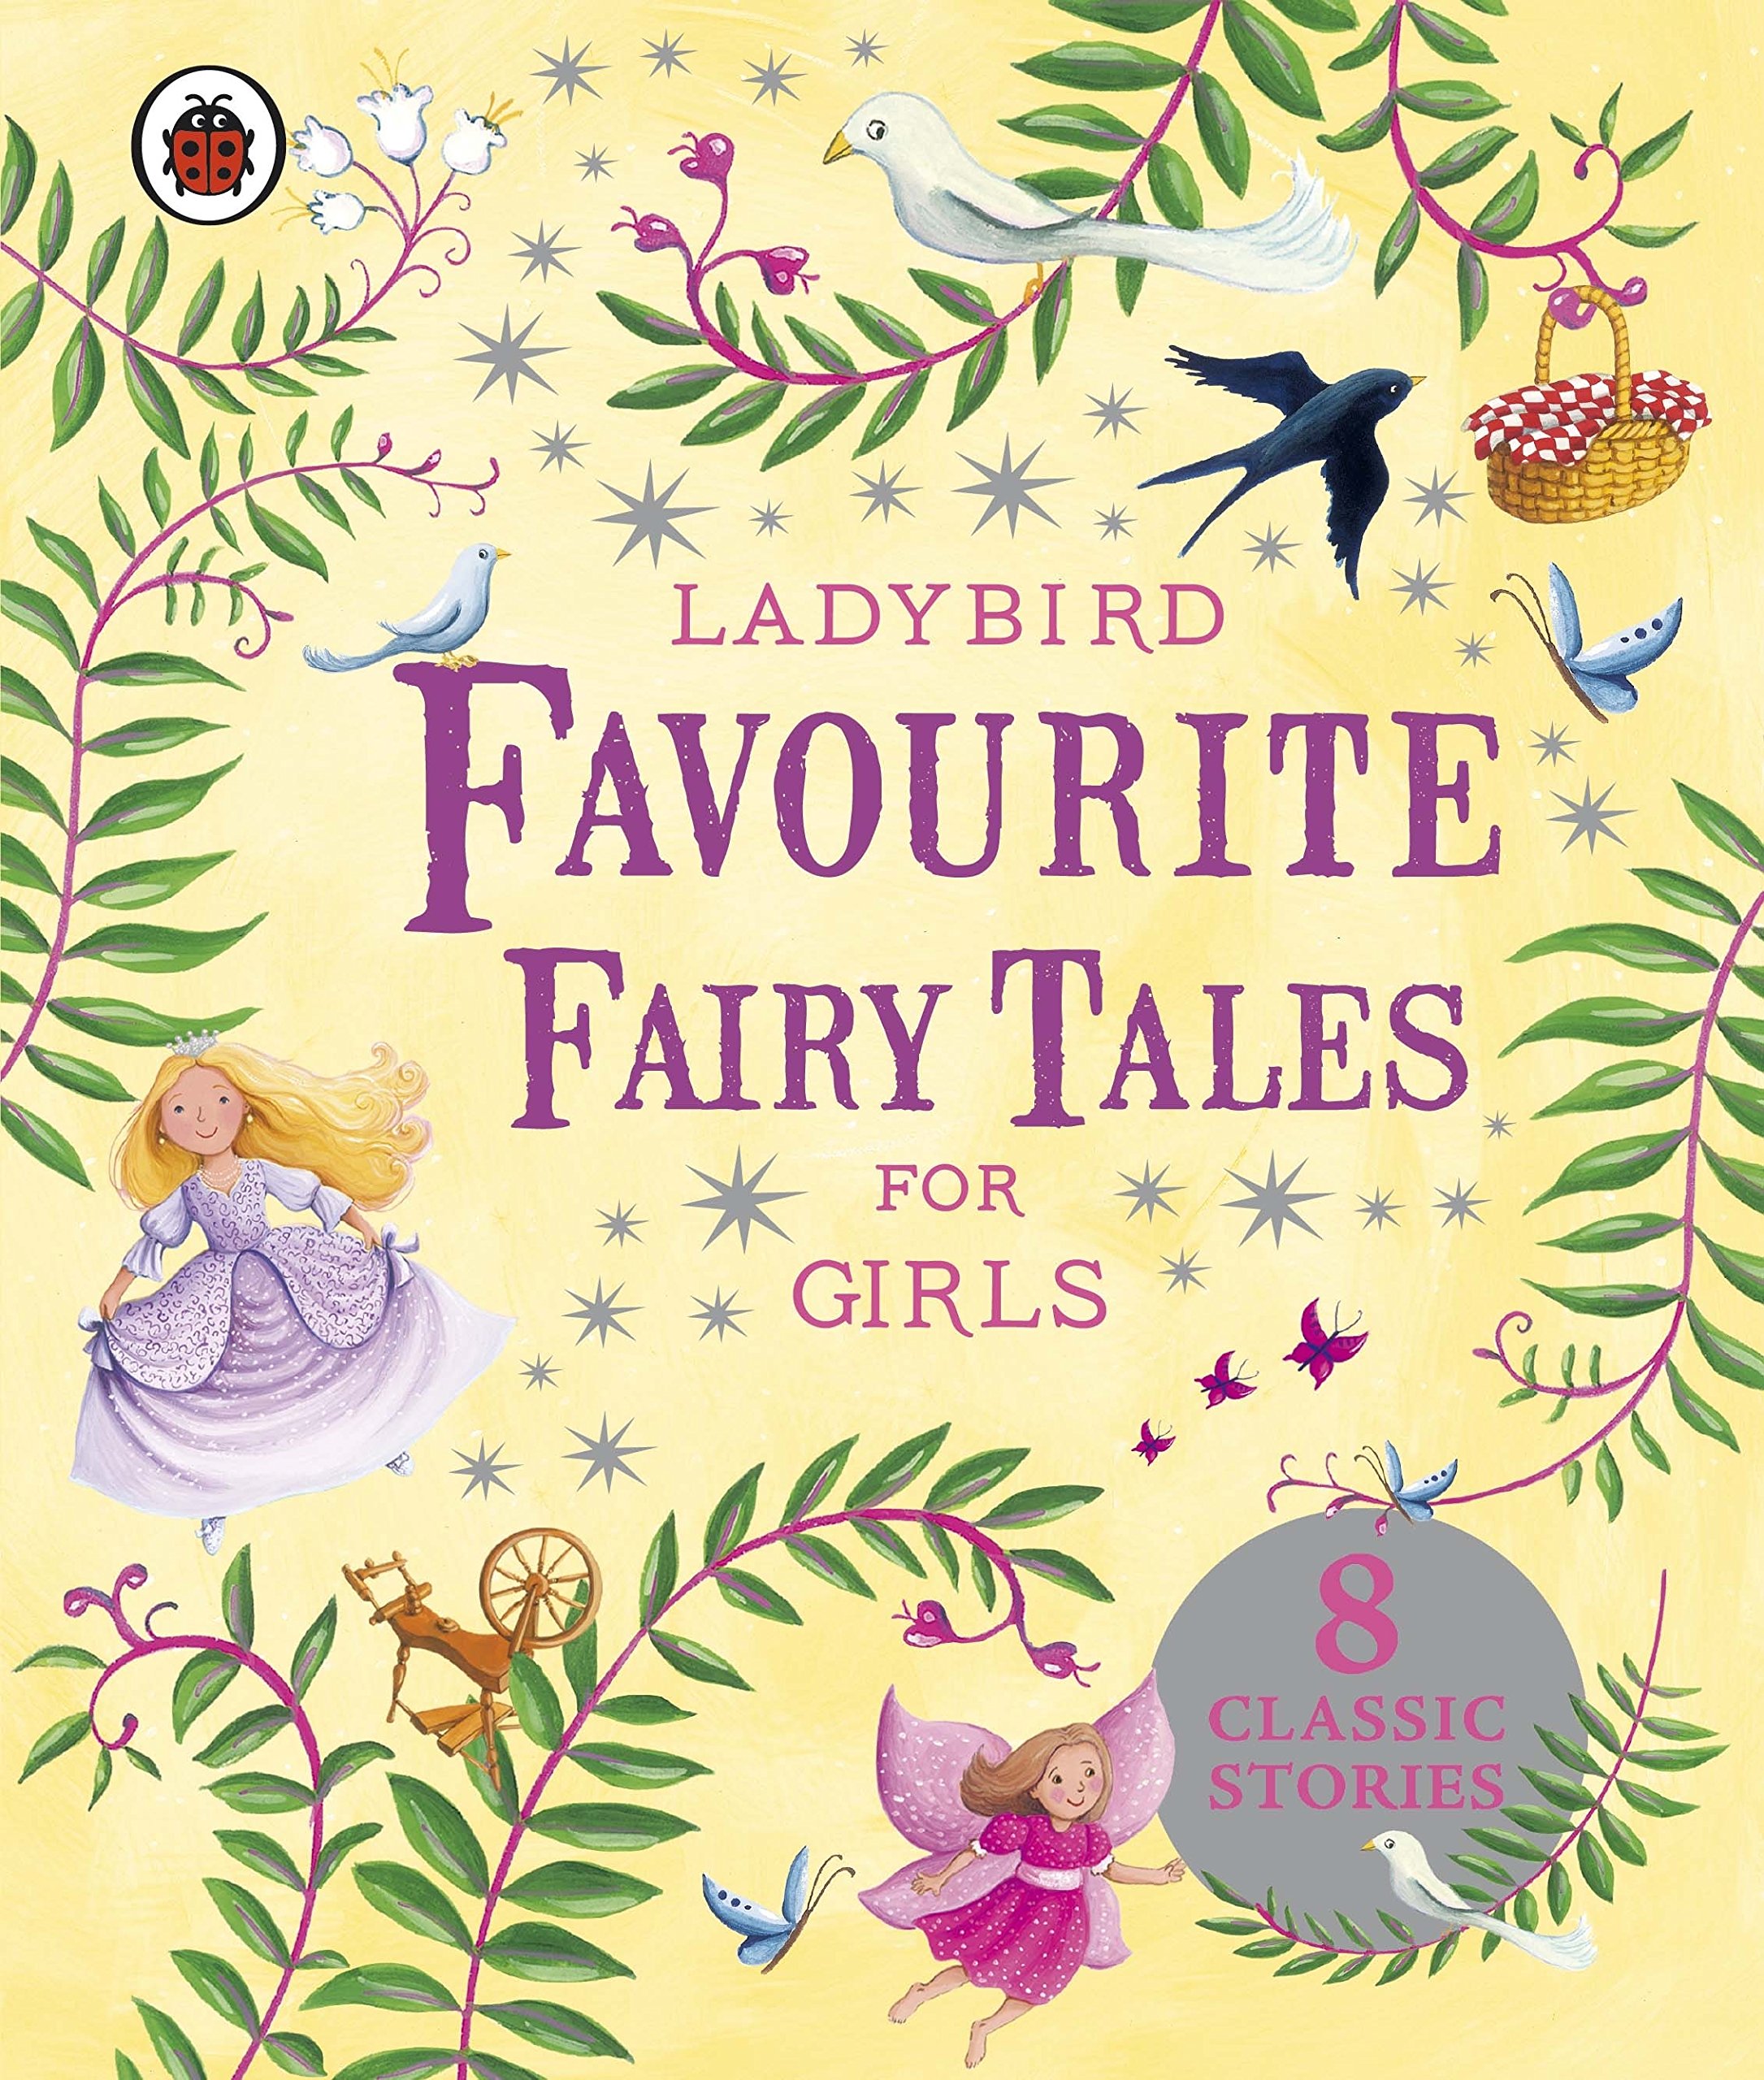 Ladybird Favourite Fariry Tales for Girls ( 8 Classic Stories)